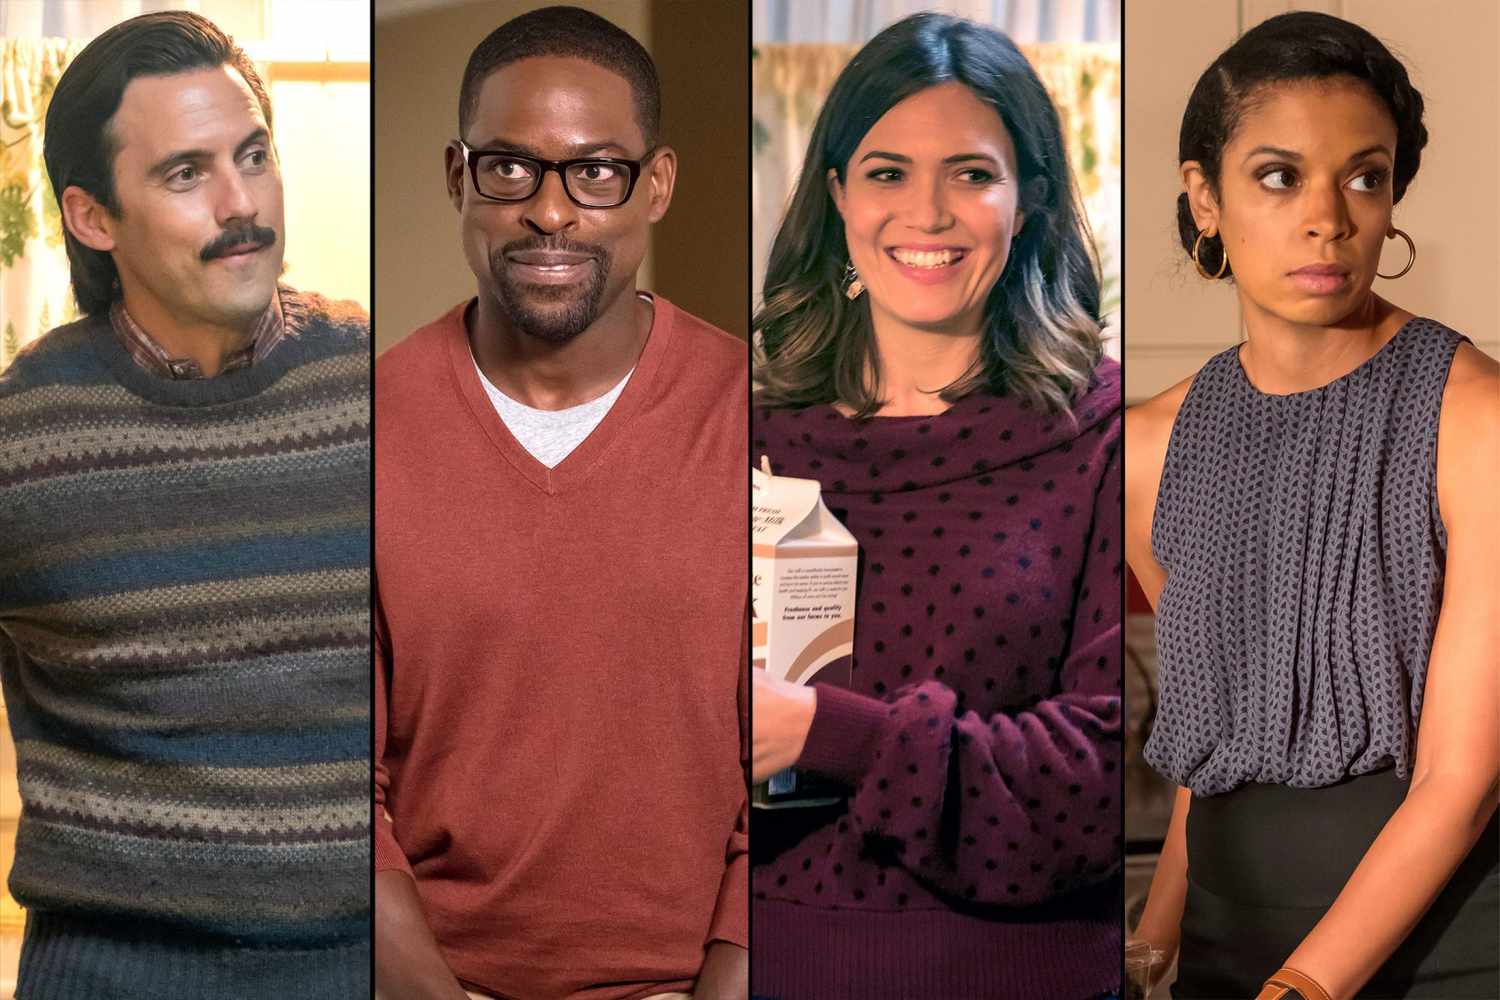 This Is Us stars reveal which other character they'd like to play